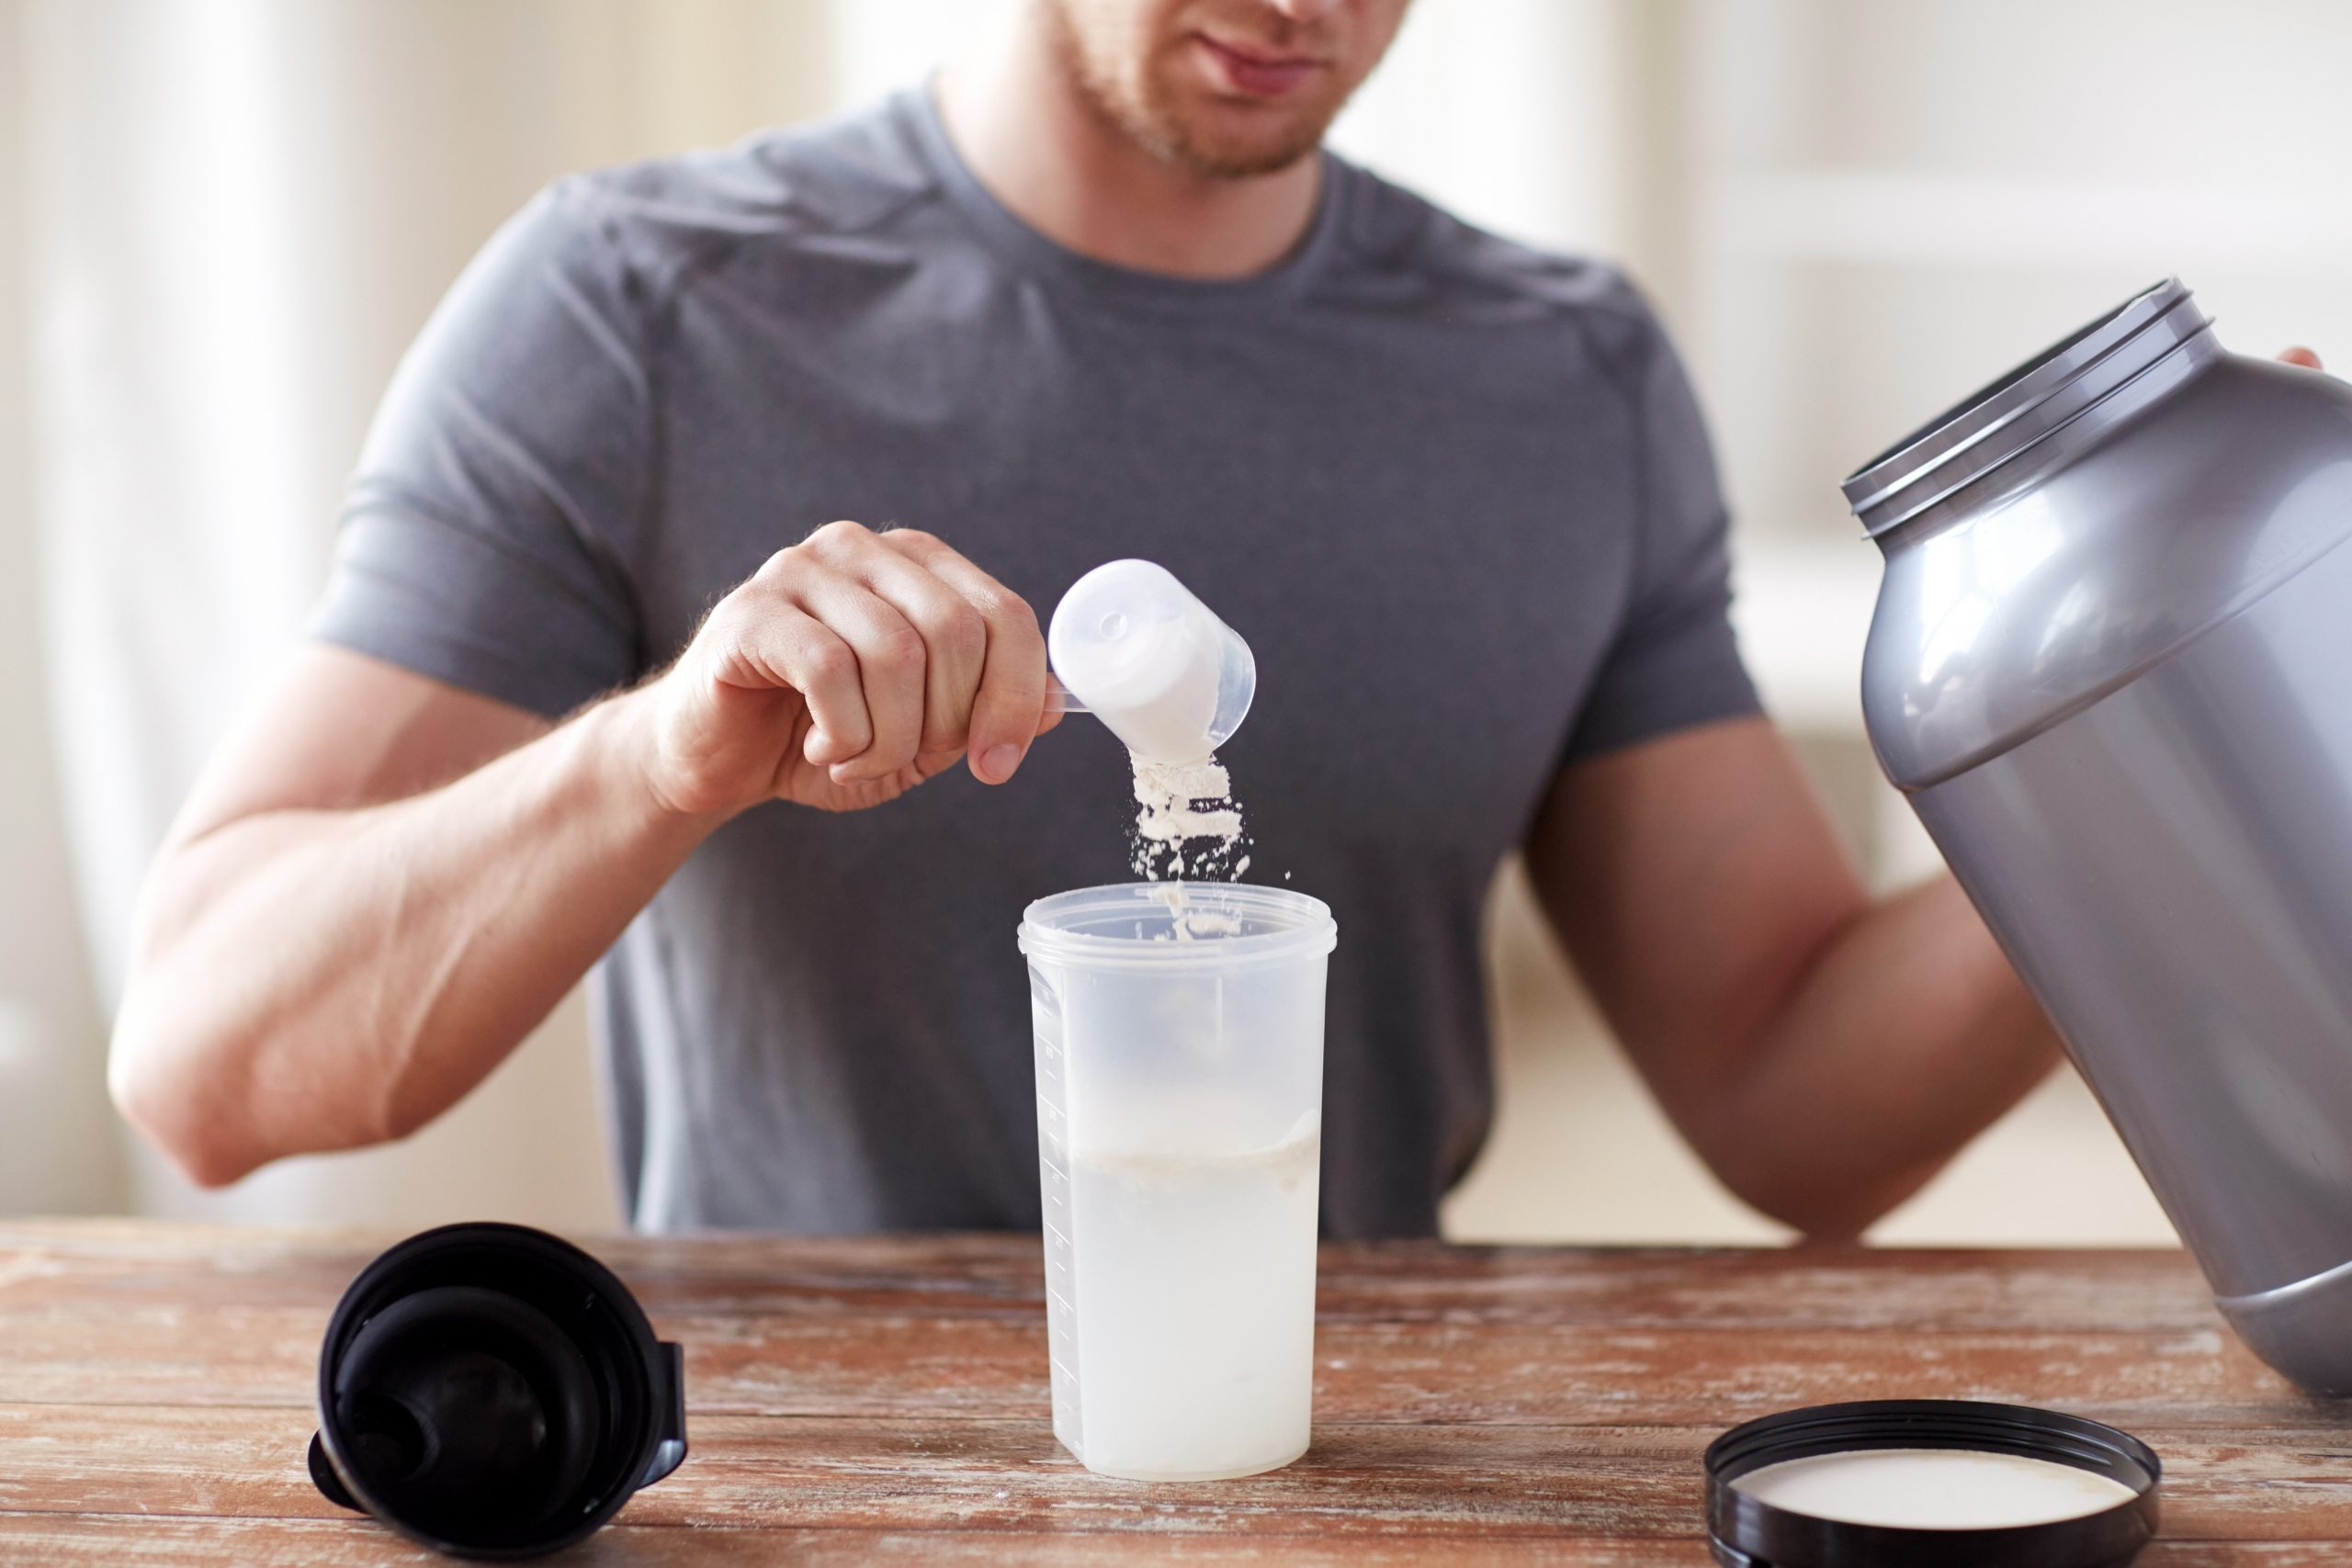 All You Need To Know About Creatine